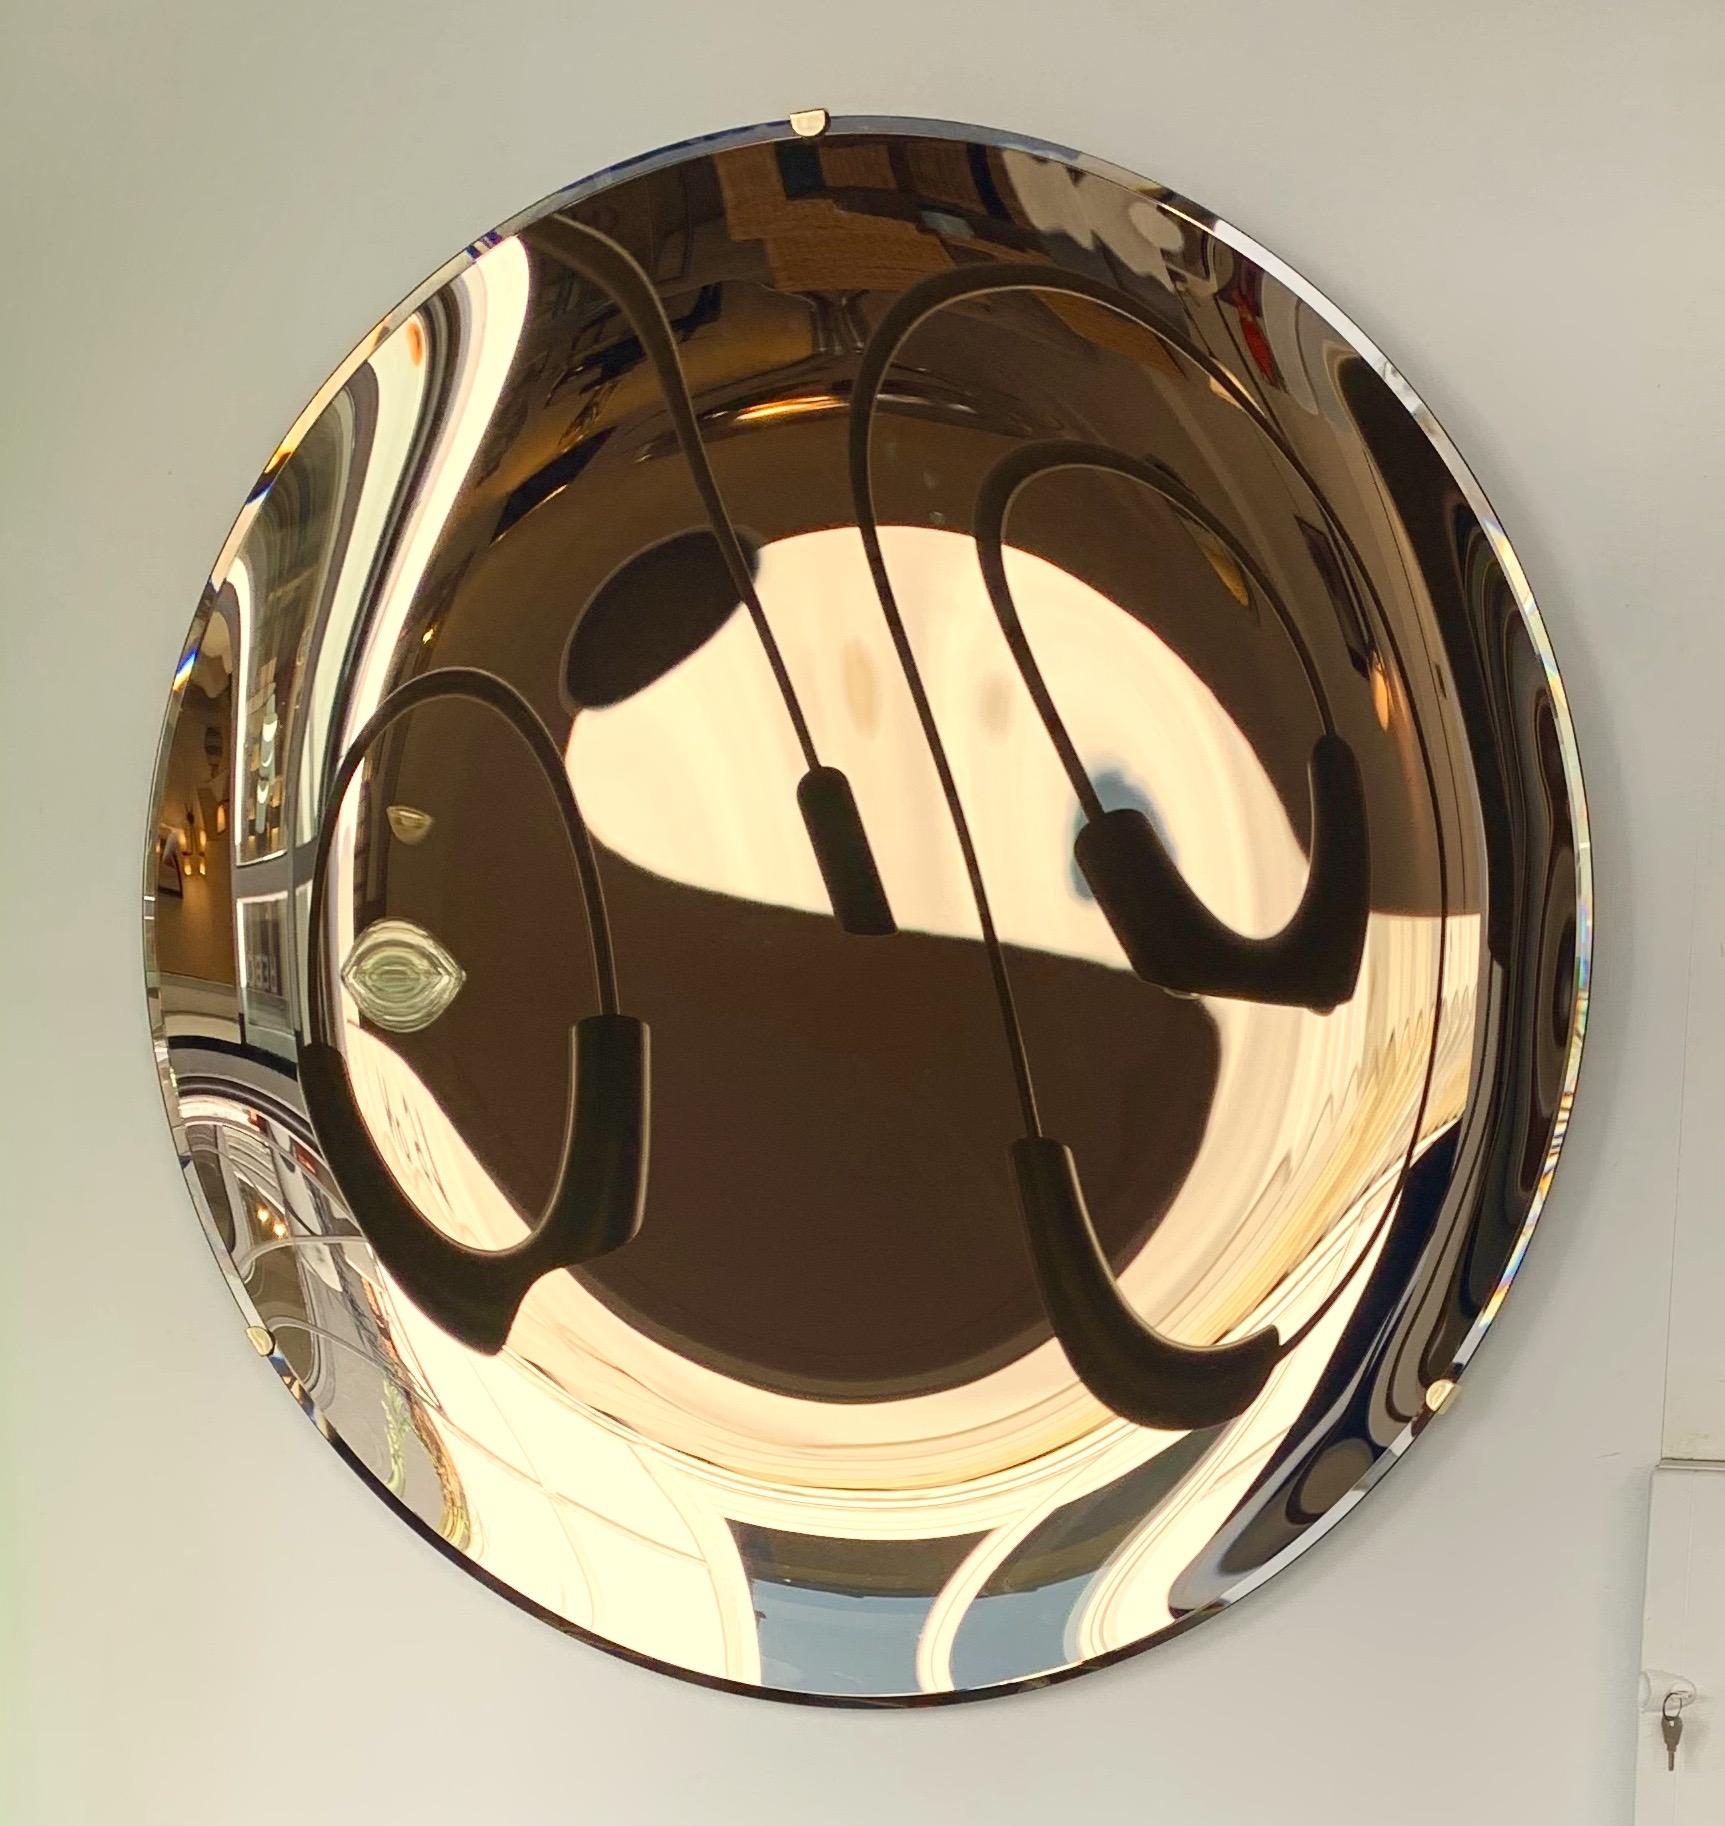 Contemporary curve concave sculpture gold bronze wall mirror, brass structure. Artisanal handmade work made by a small italian design workshop using the old style mercurization technic.

standart diameter dimensions indicated in description 43.31